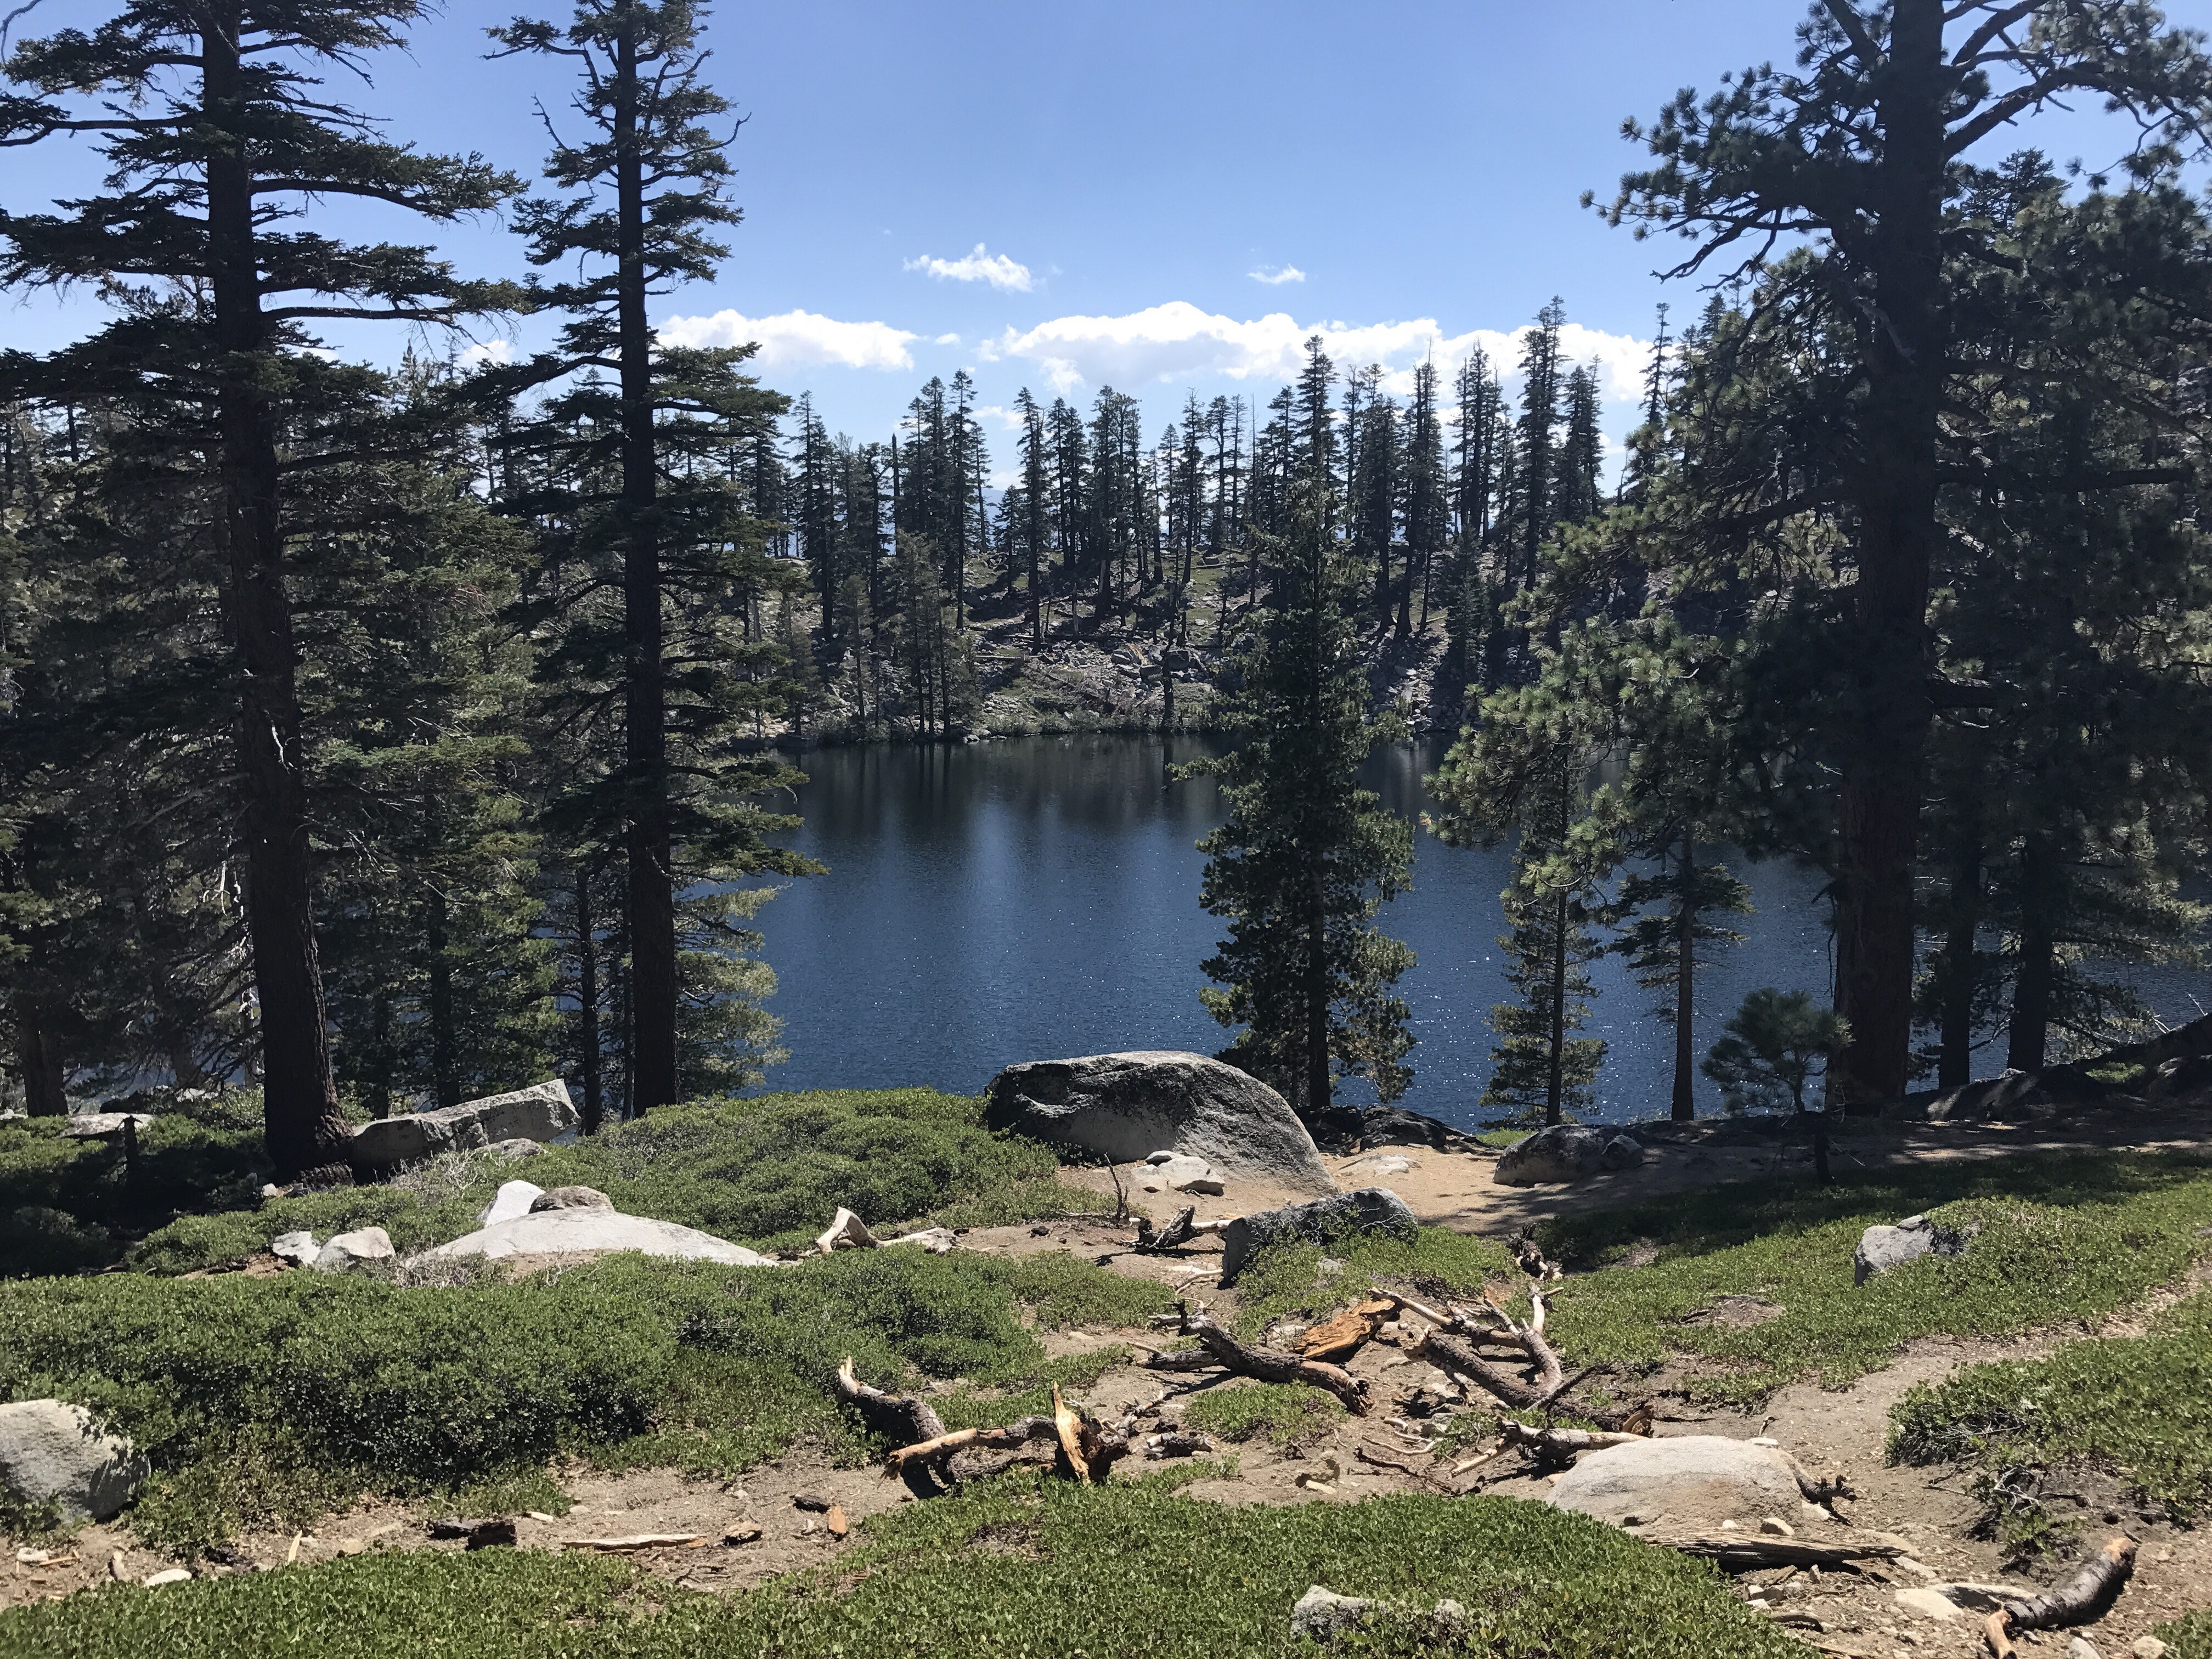 Granite Lake, a popular destination for some, off to the left of the trail while heading uphill. 8/24/2017 Lake Tahoe